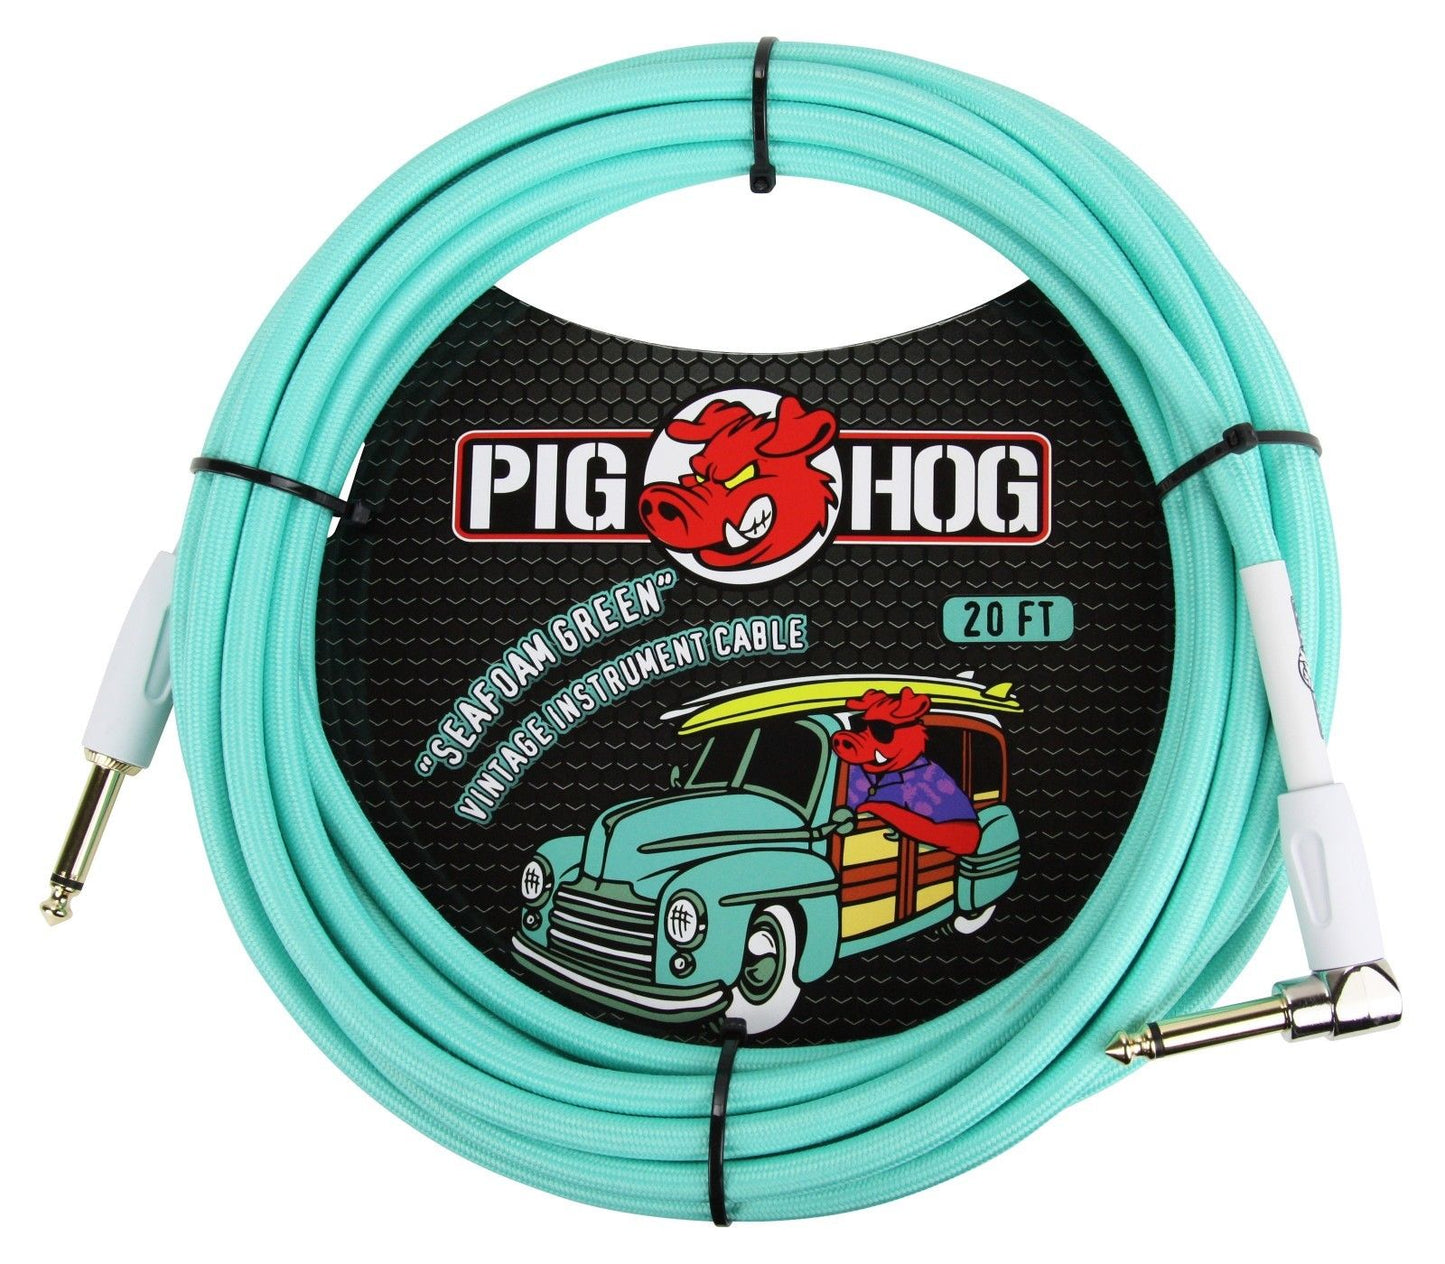 Special  OFFER! 2 Pack Pig Hog PHM25 Microphone Cable 25 Ft, PCH20SGR Guitar Cable 20ft